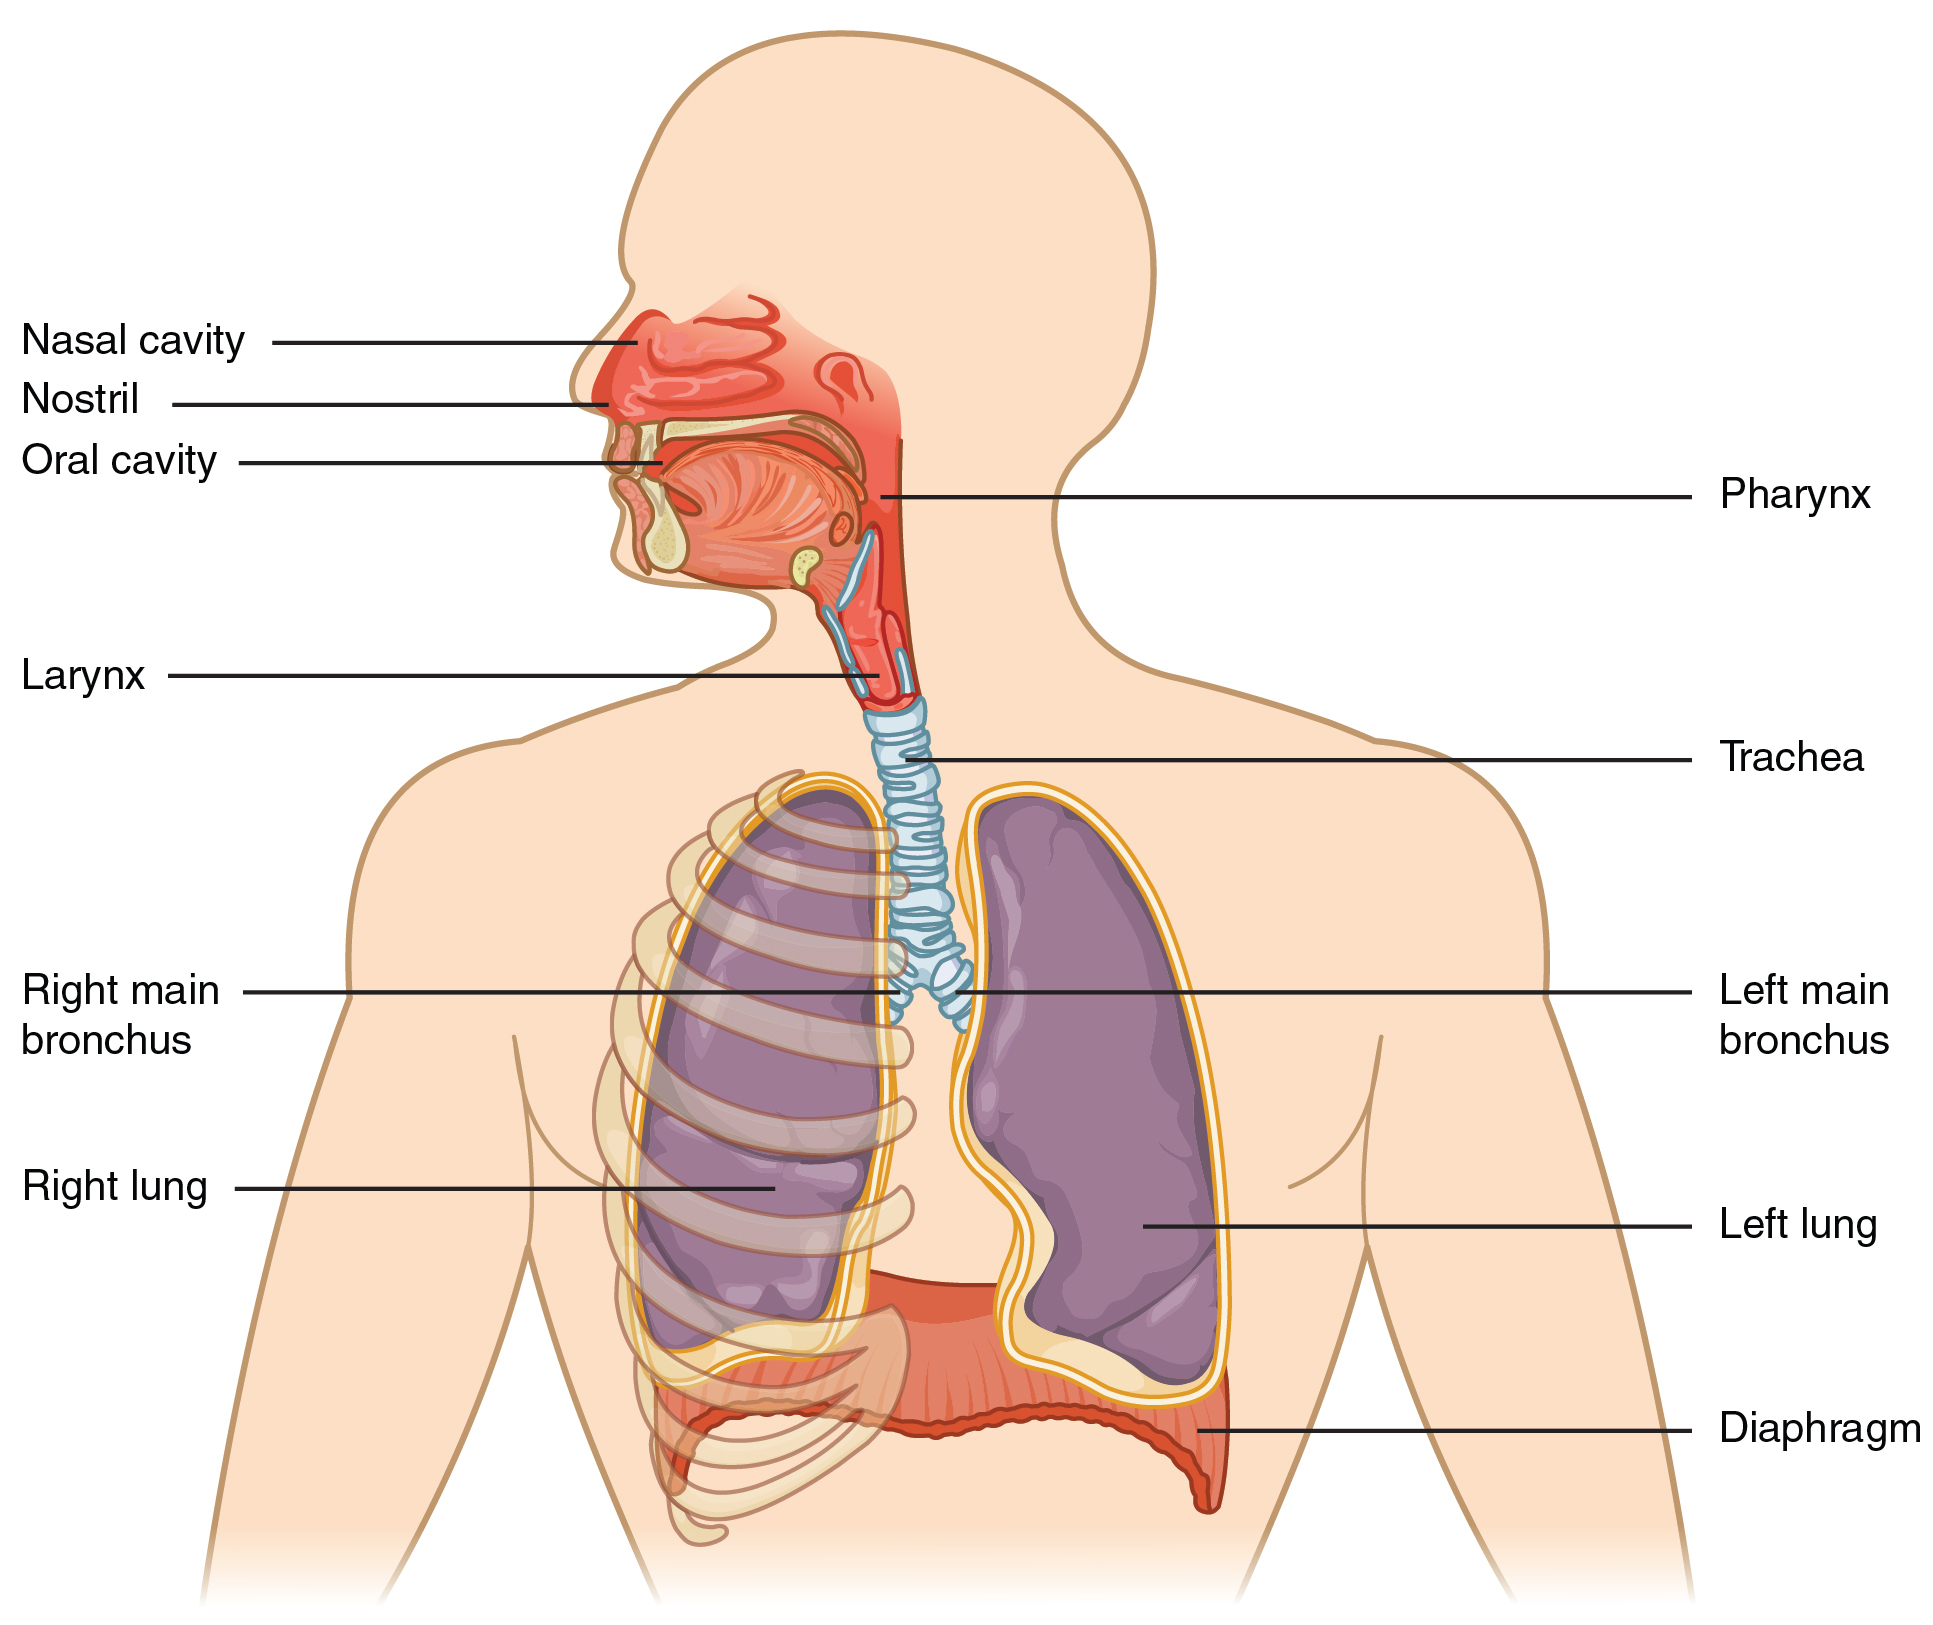 Diagram Of Organs 221 Organs And Structures Of The Respiratory System Anatomy And